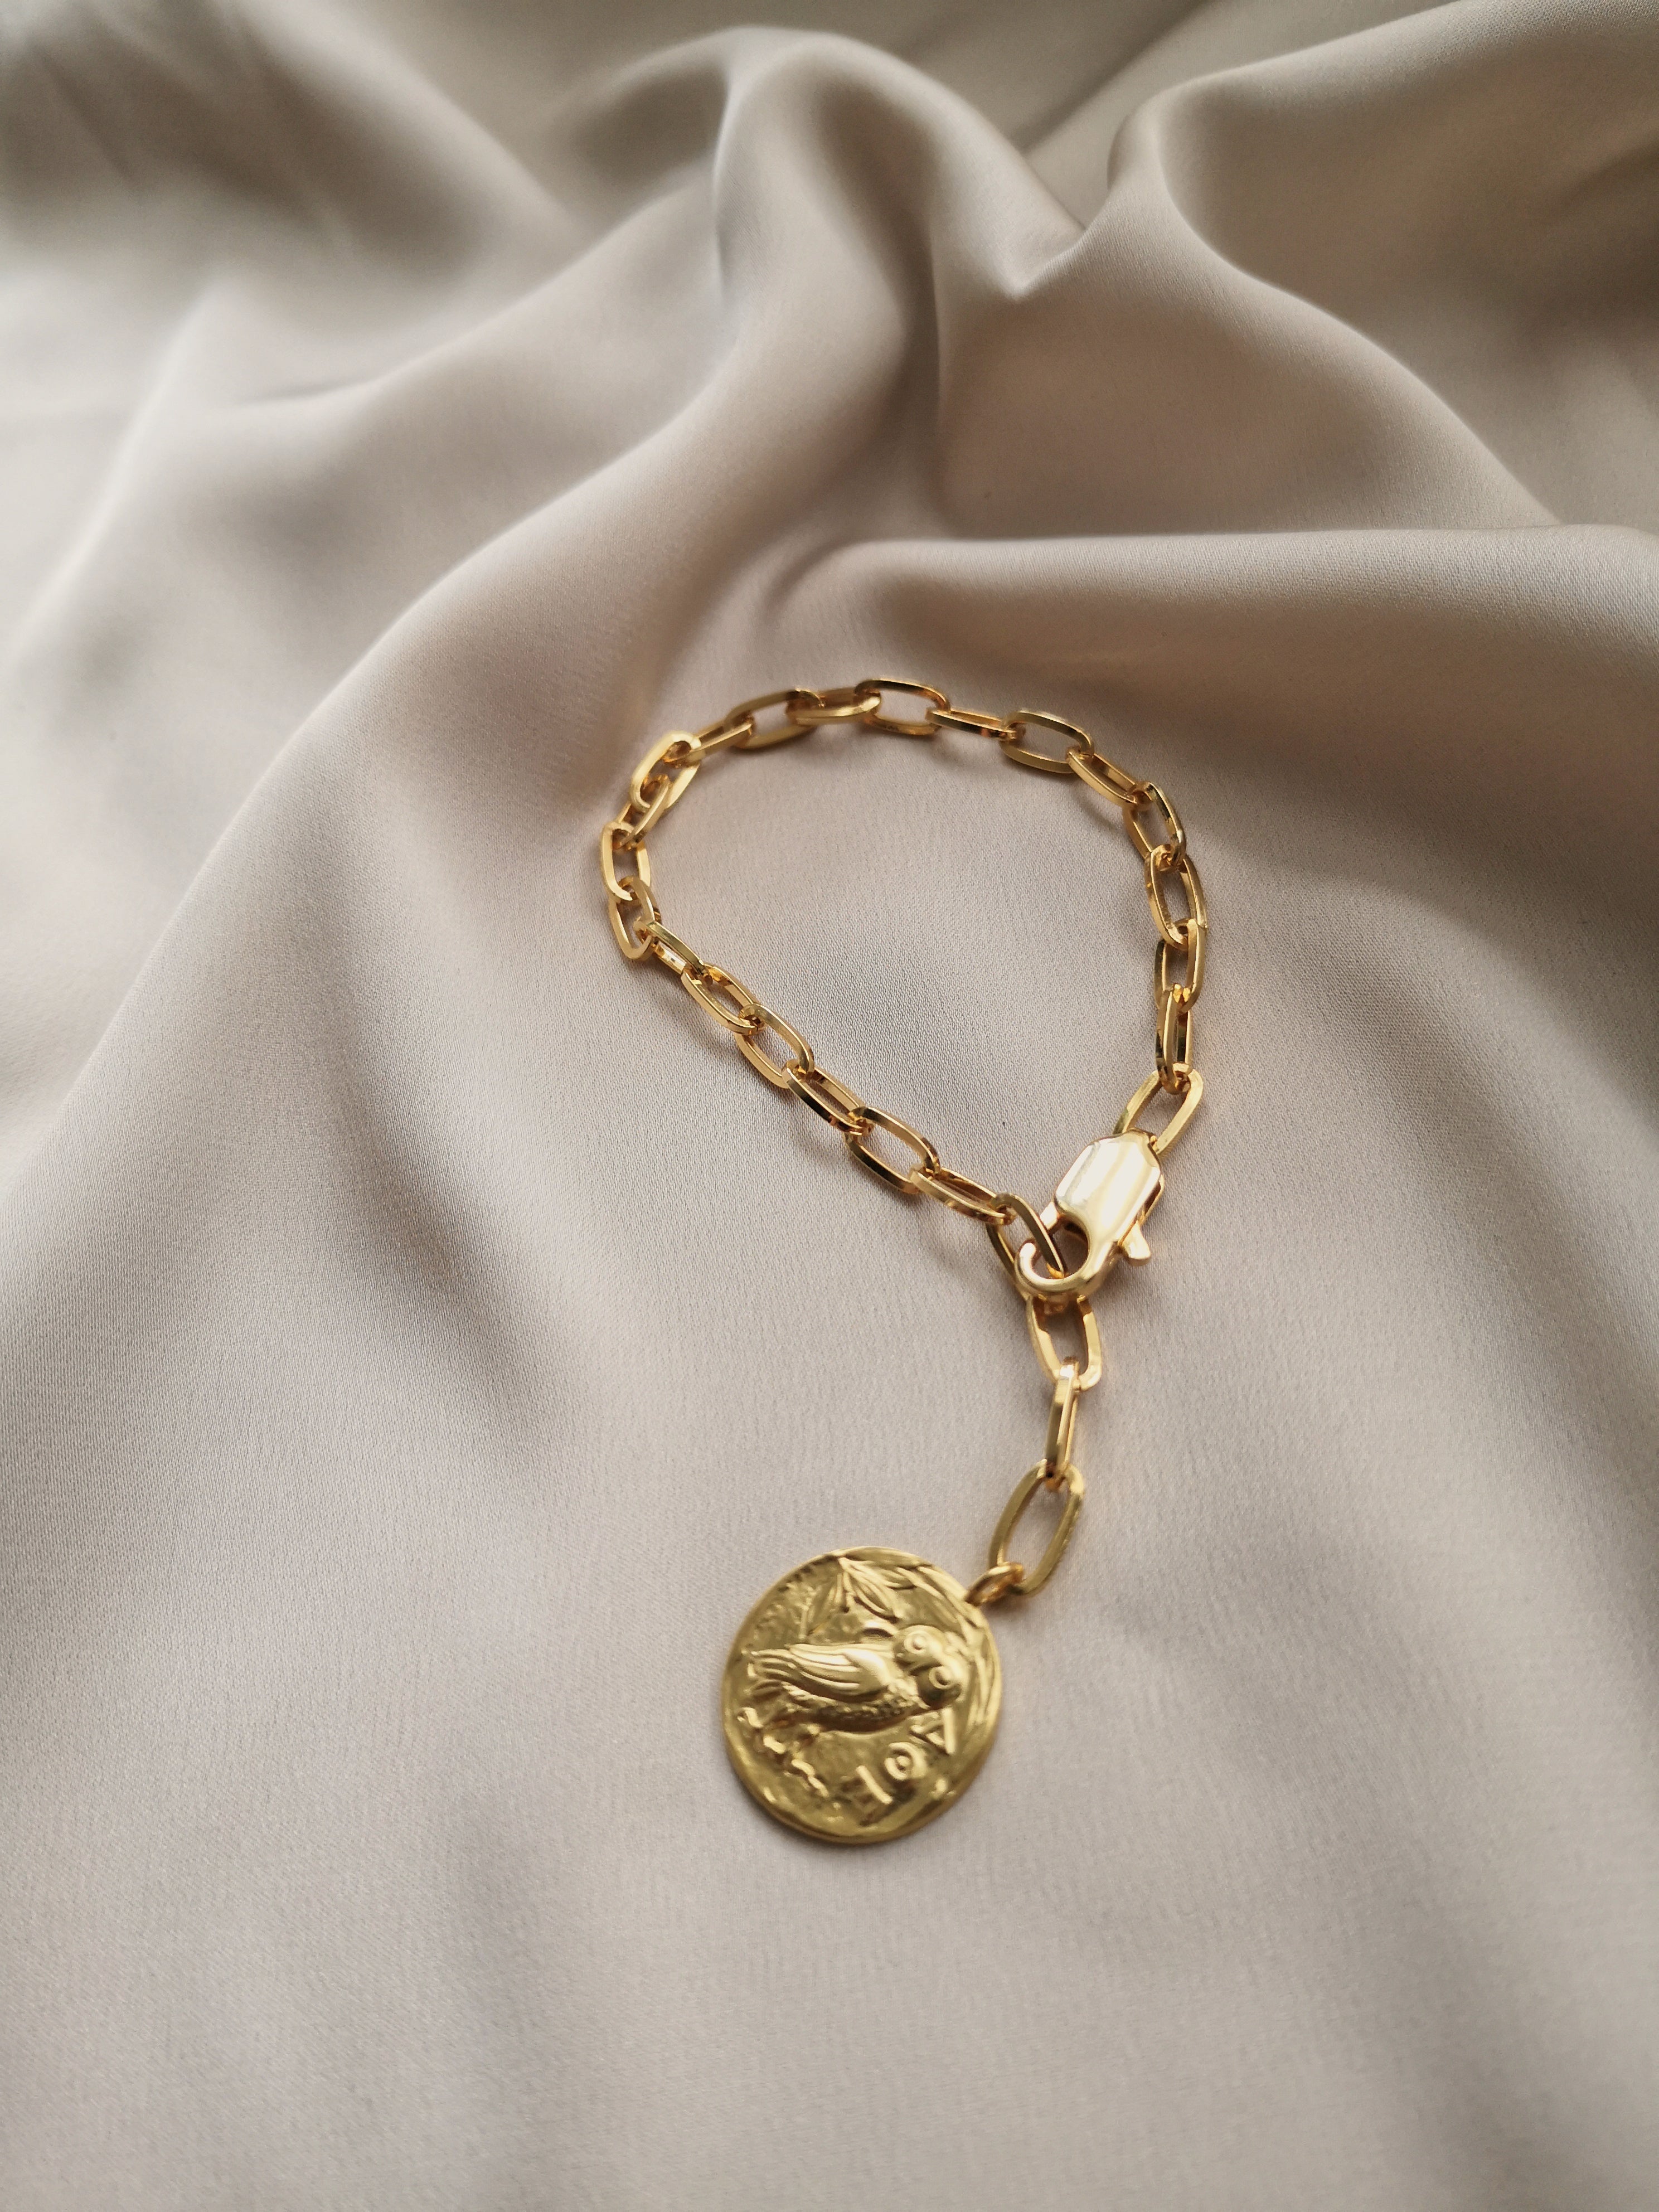 CHAIN AND COIN BRACELET